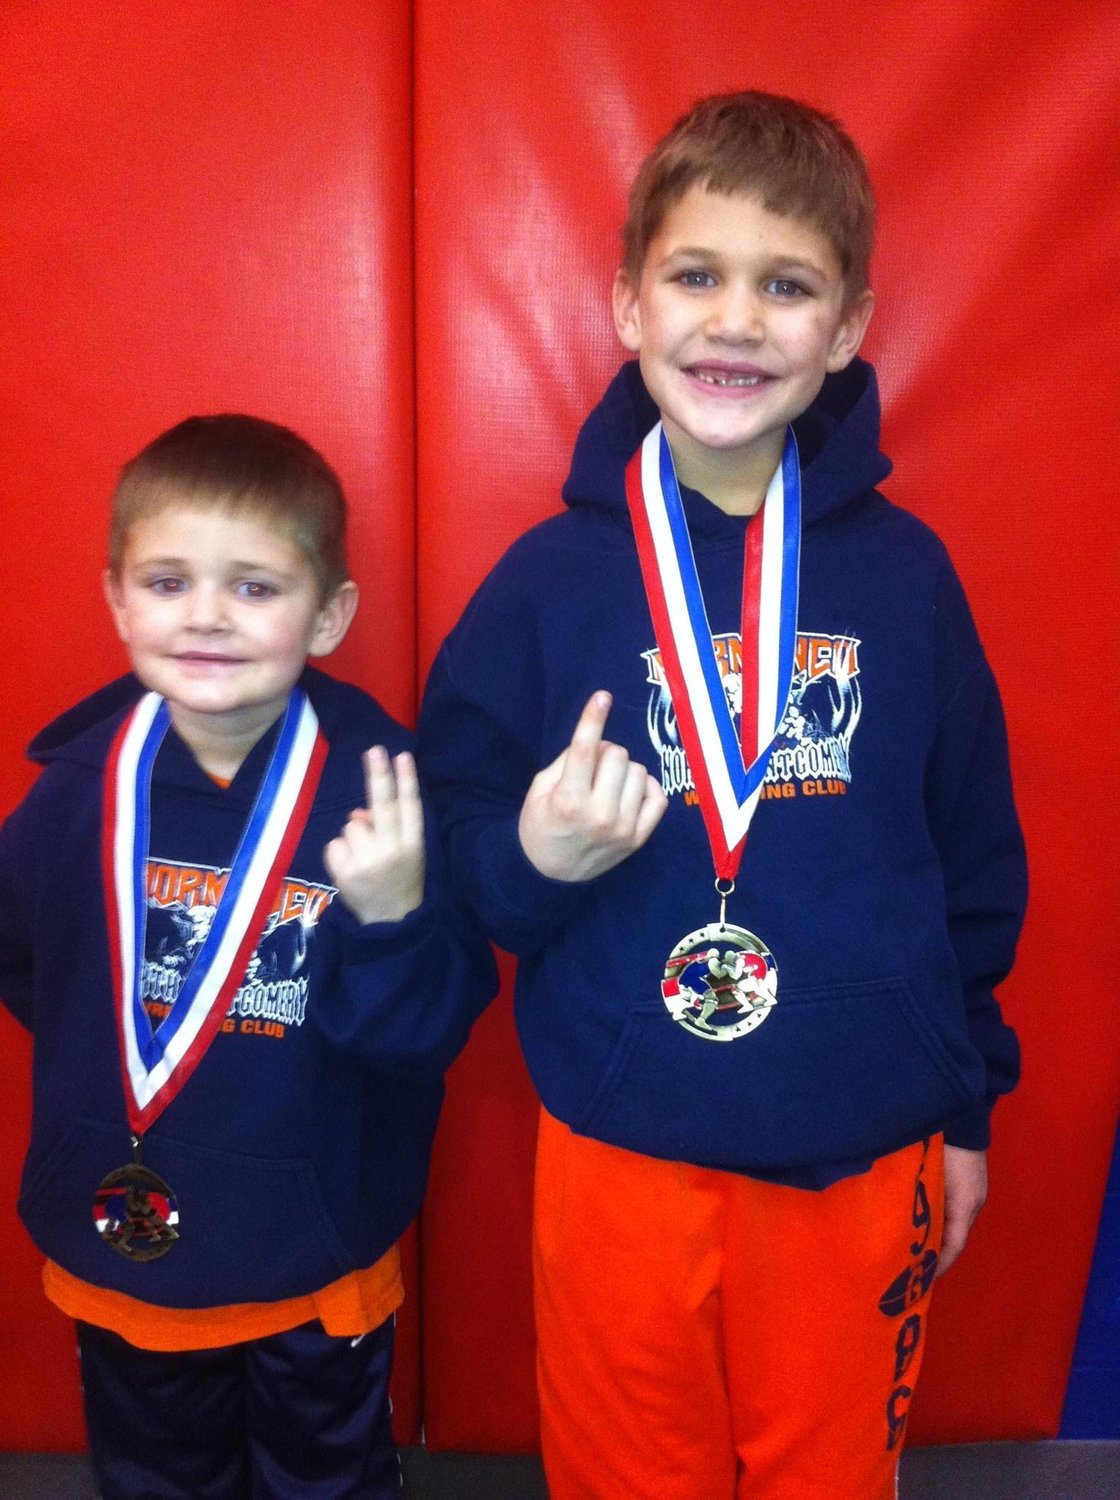 Kale (left) and Gage (right) Galloway shared a love as brothers and as wrestlers as they both began wrestling at a young age.